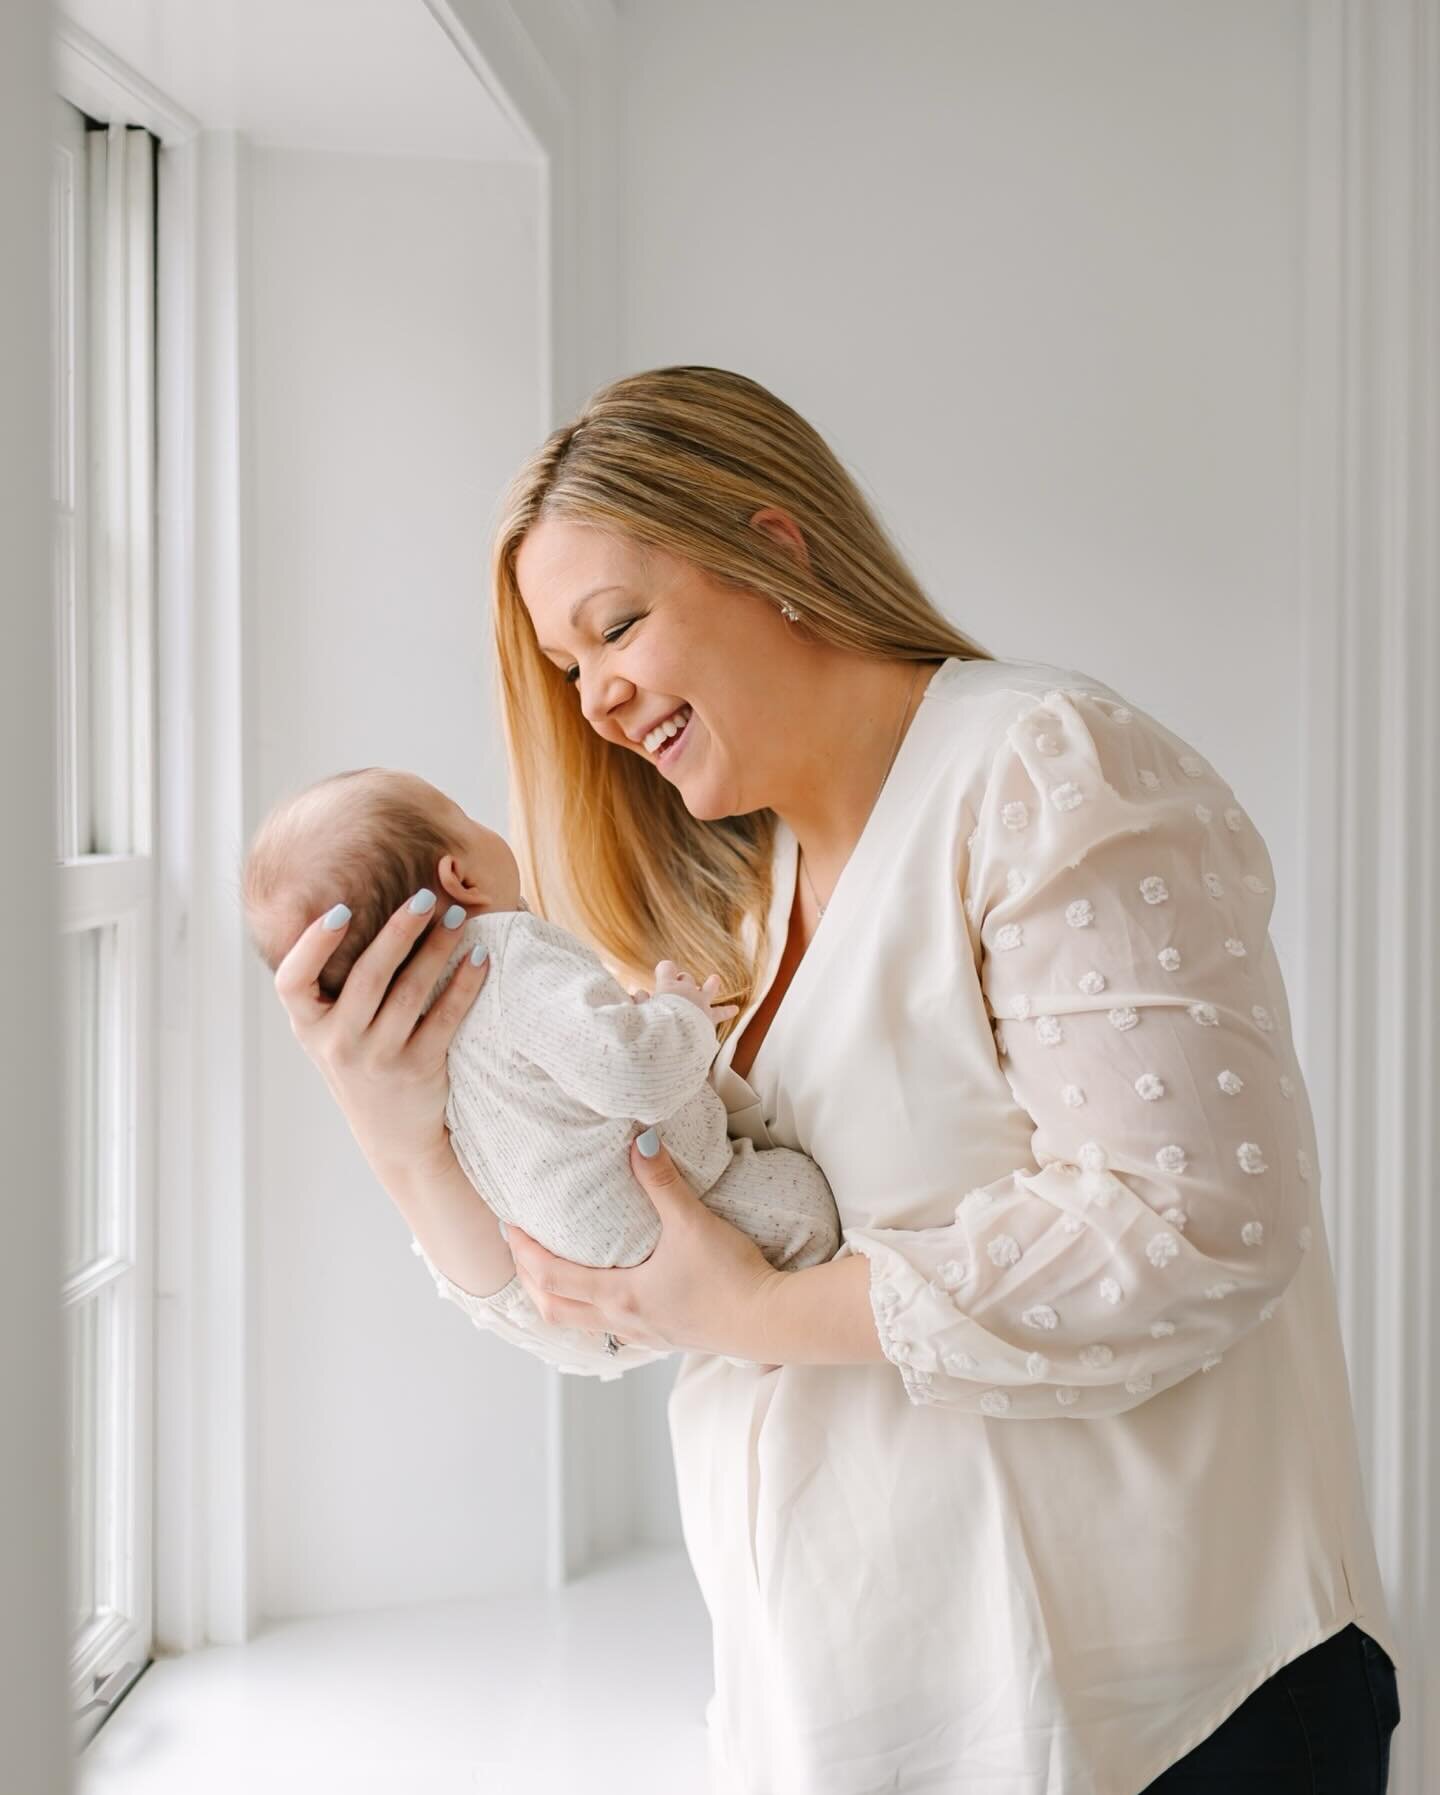 Even on the dampest, gloomiest days&hellip; @thenbptstudio is so warm and inviting for any kind of session.
.
.
.
.
.
.
#family #familyphotography #familyphotographer #newburyport #newburyportma #newburyportmom #bostonfamilyphotographer #familyportra